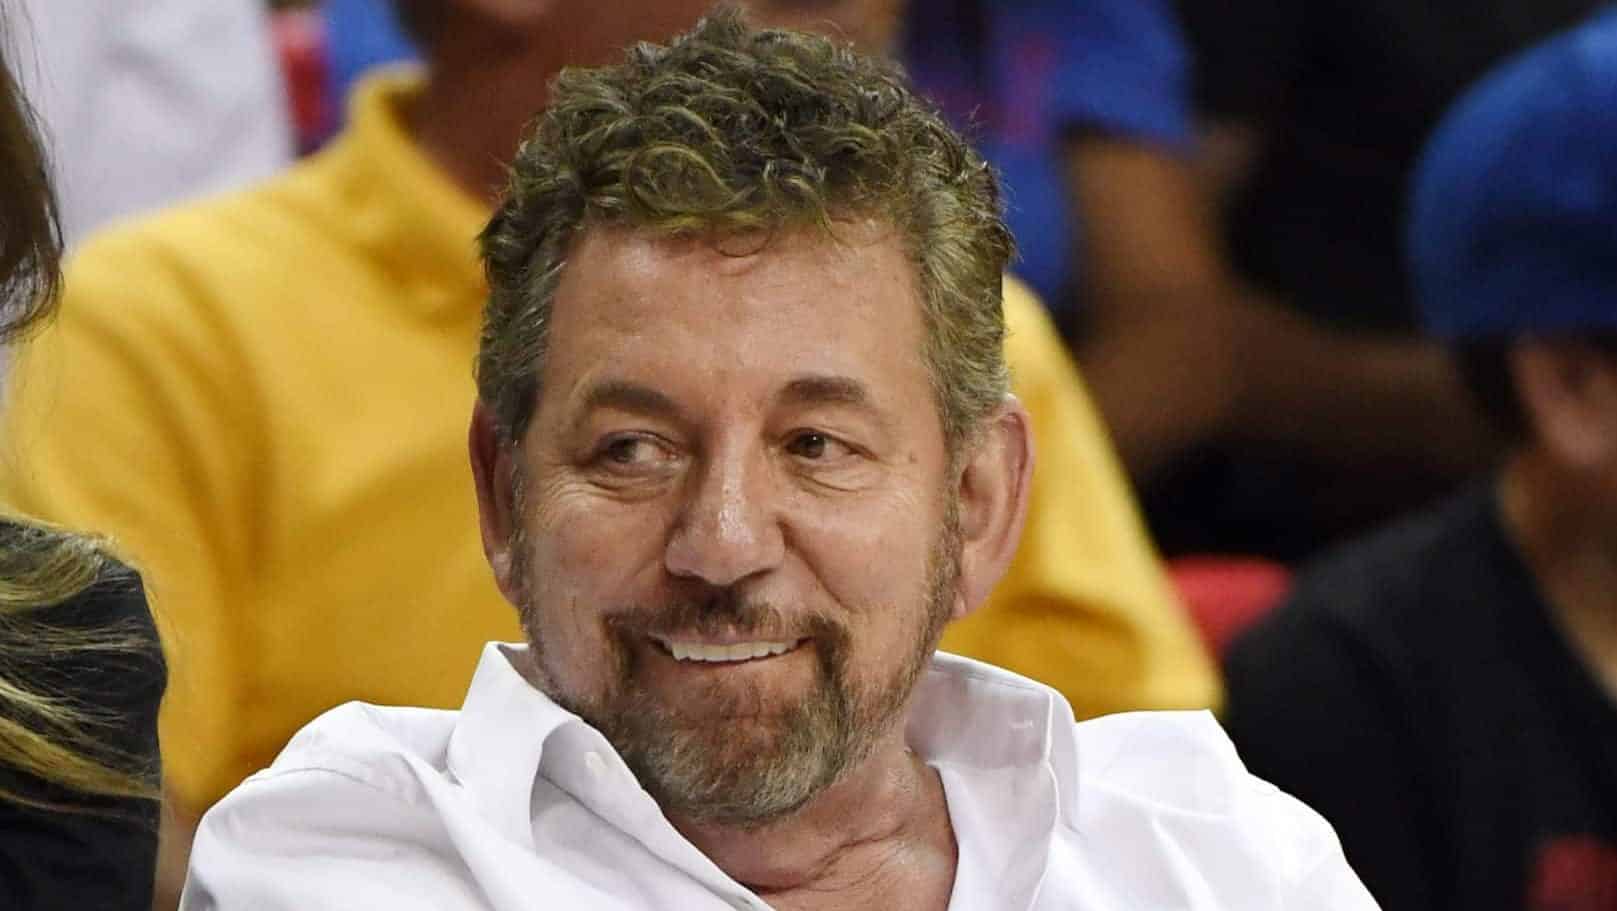 LAS VEGAS, NEVADA - JULY 07: Executive chairman and CEO of The Madison Square Garden Company and executive chairman of MSG Networks James L. Dolan attends a game between the New York Knicks and the Phoenix Suns during the 2019 NBA Summer League at the Thomas & Mack Center on July 7, 2019 in Las Vegas, Nevada. NOTE TO USER: User expressly acknowledges and agrees that, by downloading and or using this photograph, User is consenting to the terms and conditions of the Getty Images License Agreement.